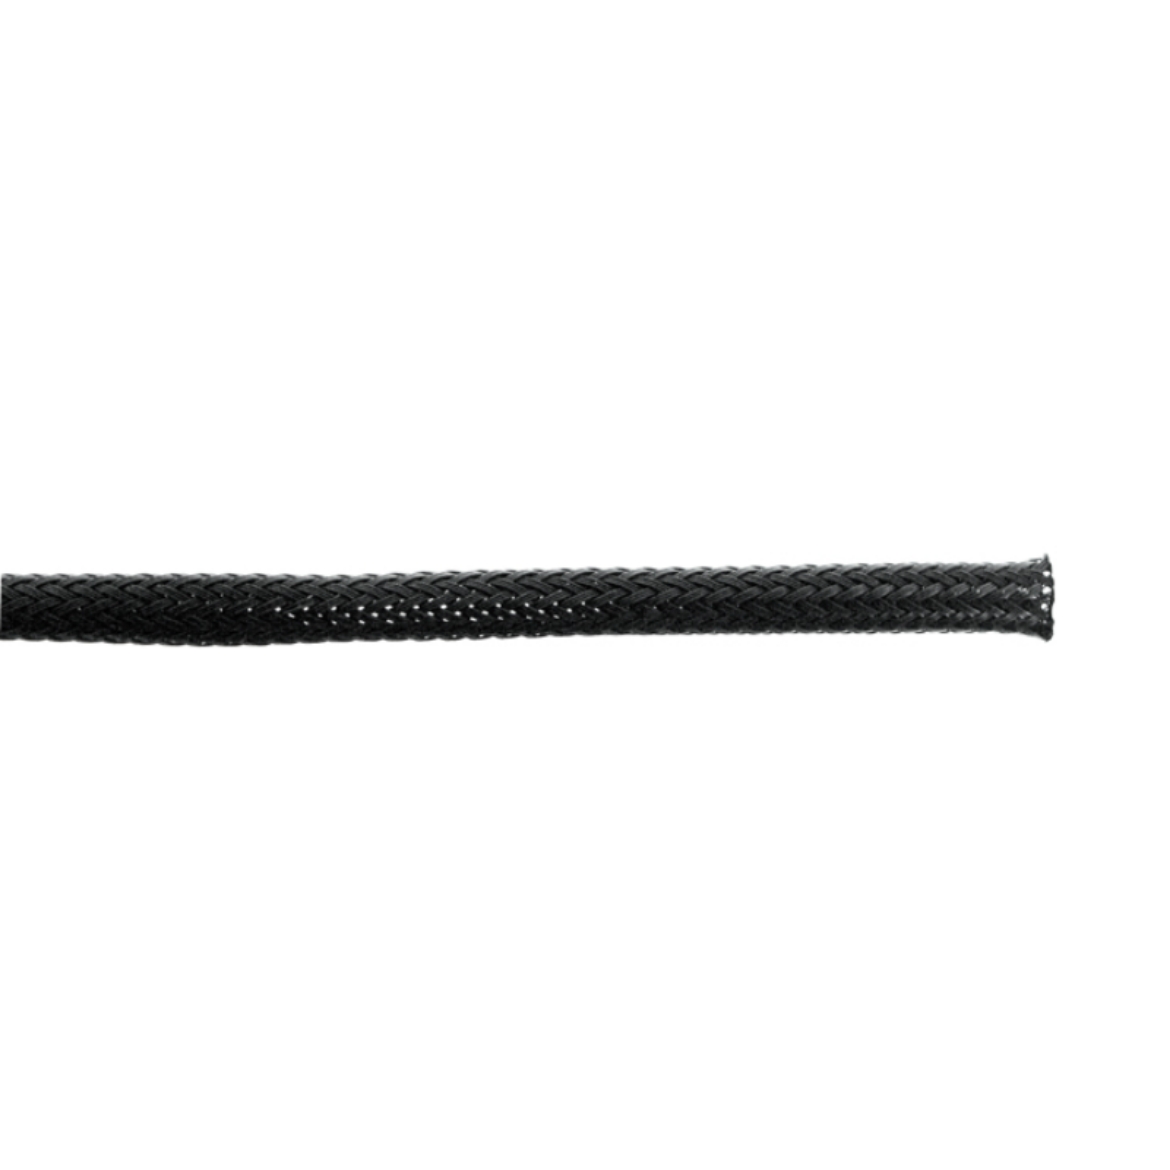 Picture of LV AUTOMOTIVE BRAIDED EXPANDABLE SLEEVING 6MM BLACK - 100M ROLL